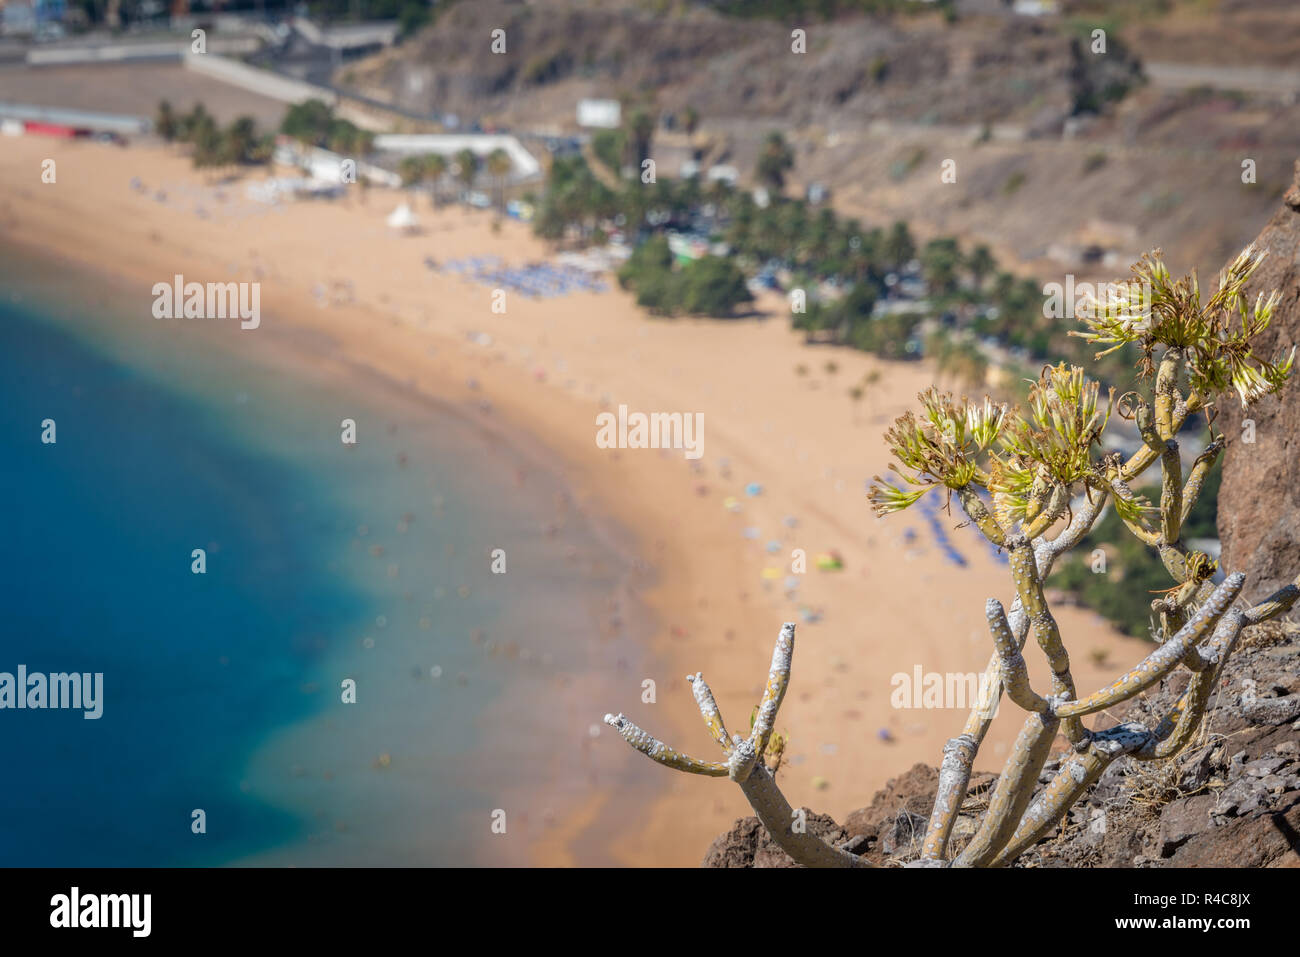 Focus at palm tree with Teresitas Beach and San Andres, Canary Islands, Spain Stock Photo